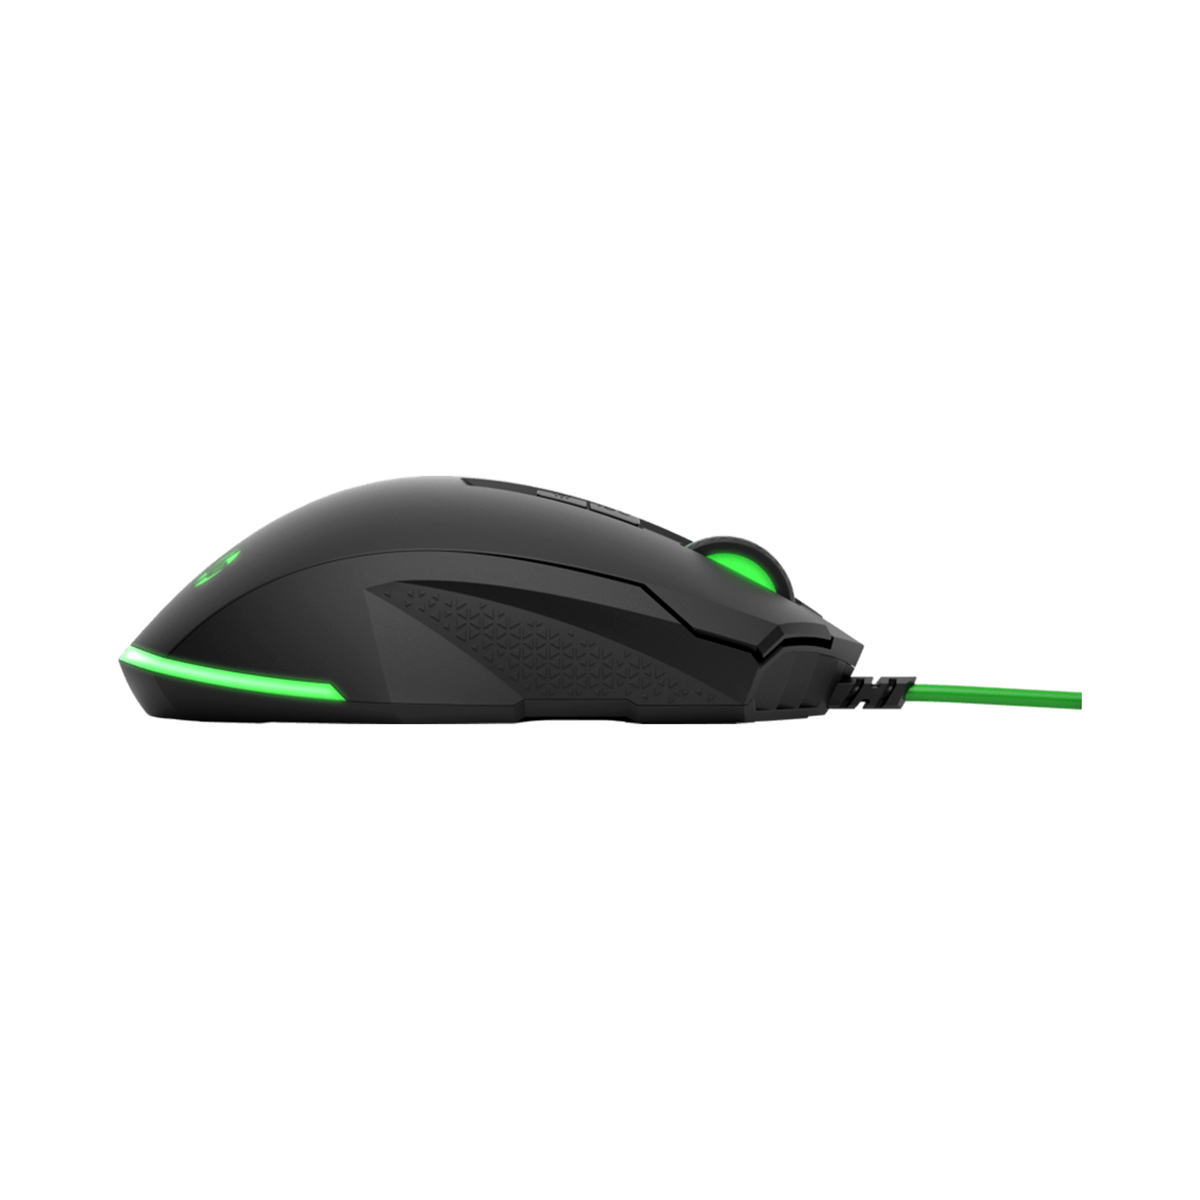 HP Pavilion Gaming Mouse 200 -5JS07AA